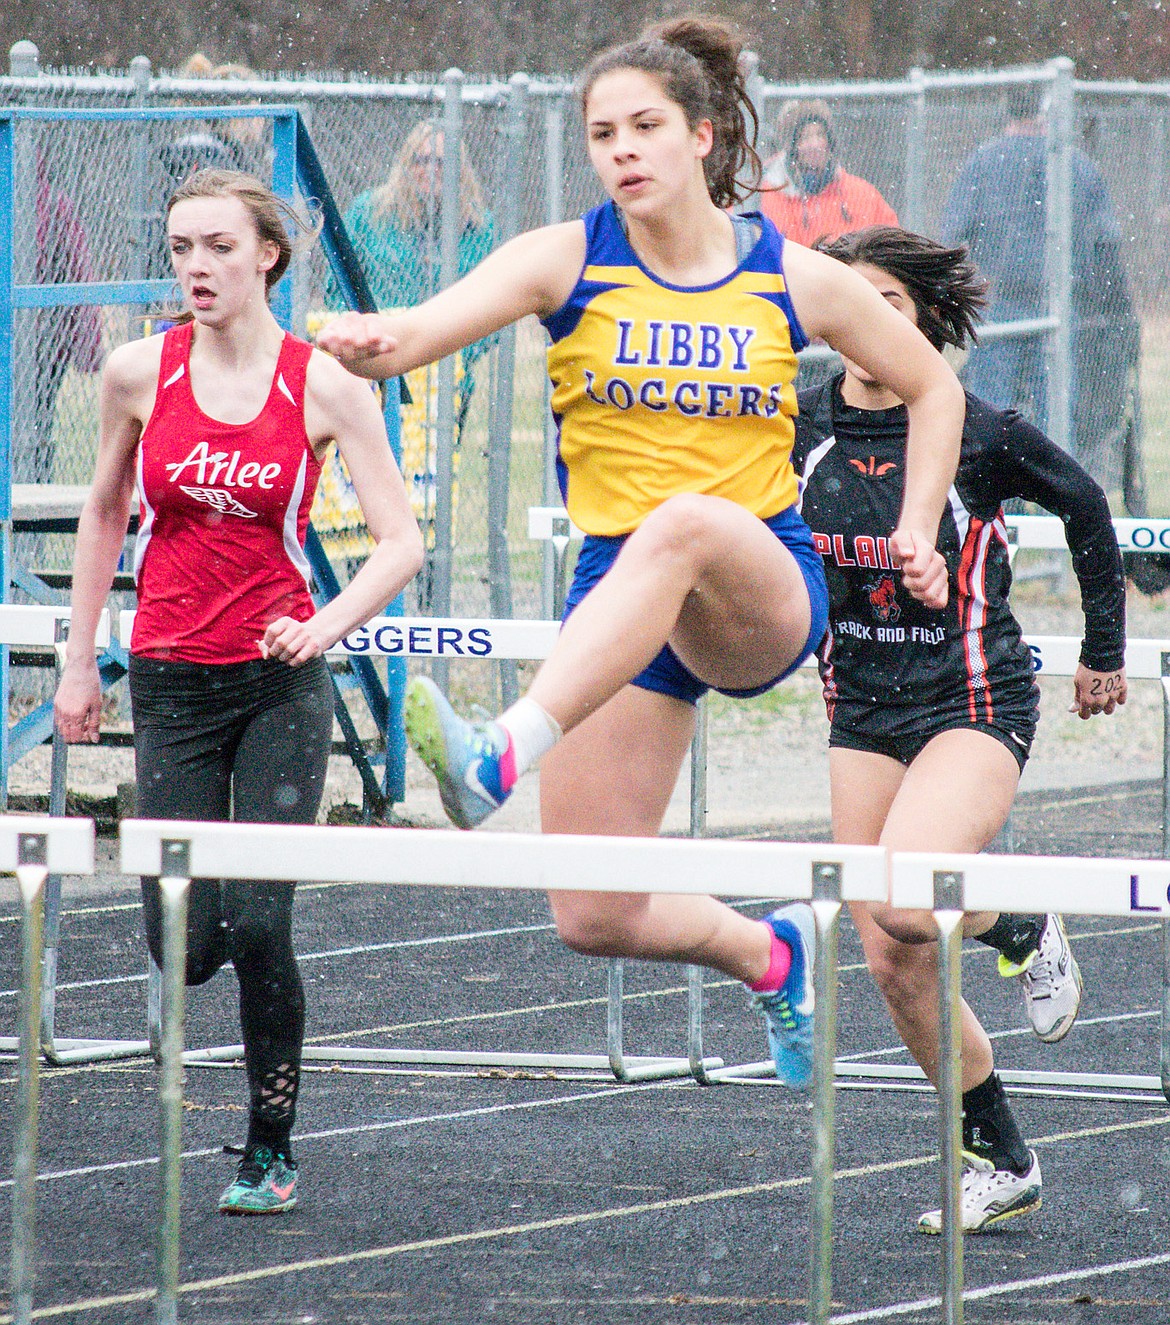 With snow falling all around, Libby junior Bella Hollingsworth runs to second place in the 100m hurdles at the Eureka Invitational hosted at Libby High School, April 7. (Ben Kibbey/The Western News)